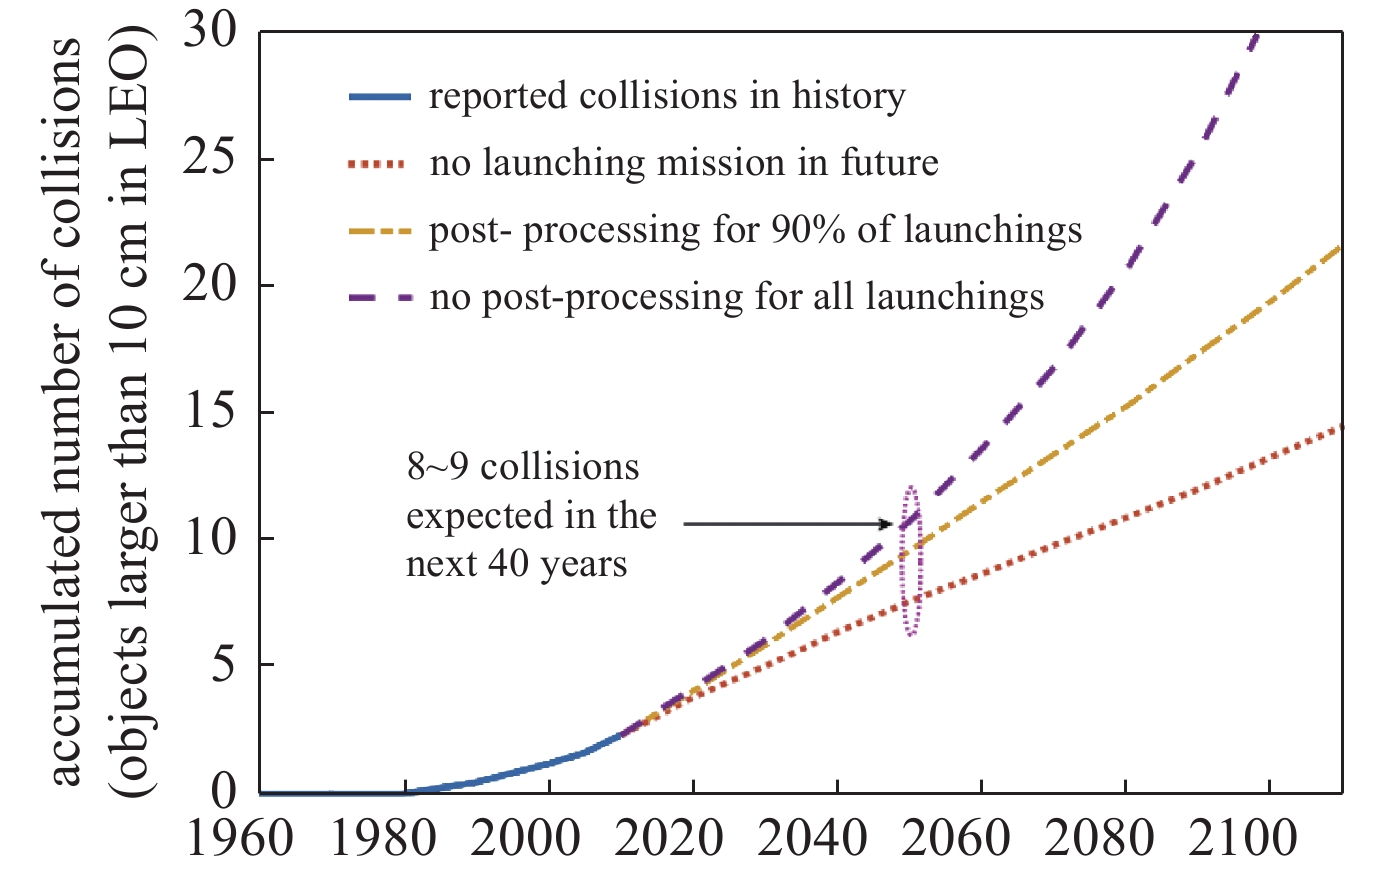 Prediction of space debris collisions based on LEGEND model[5]